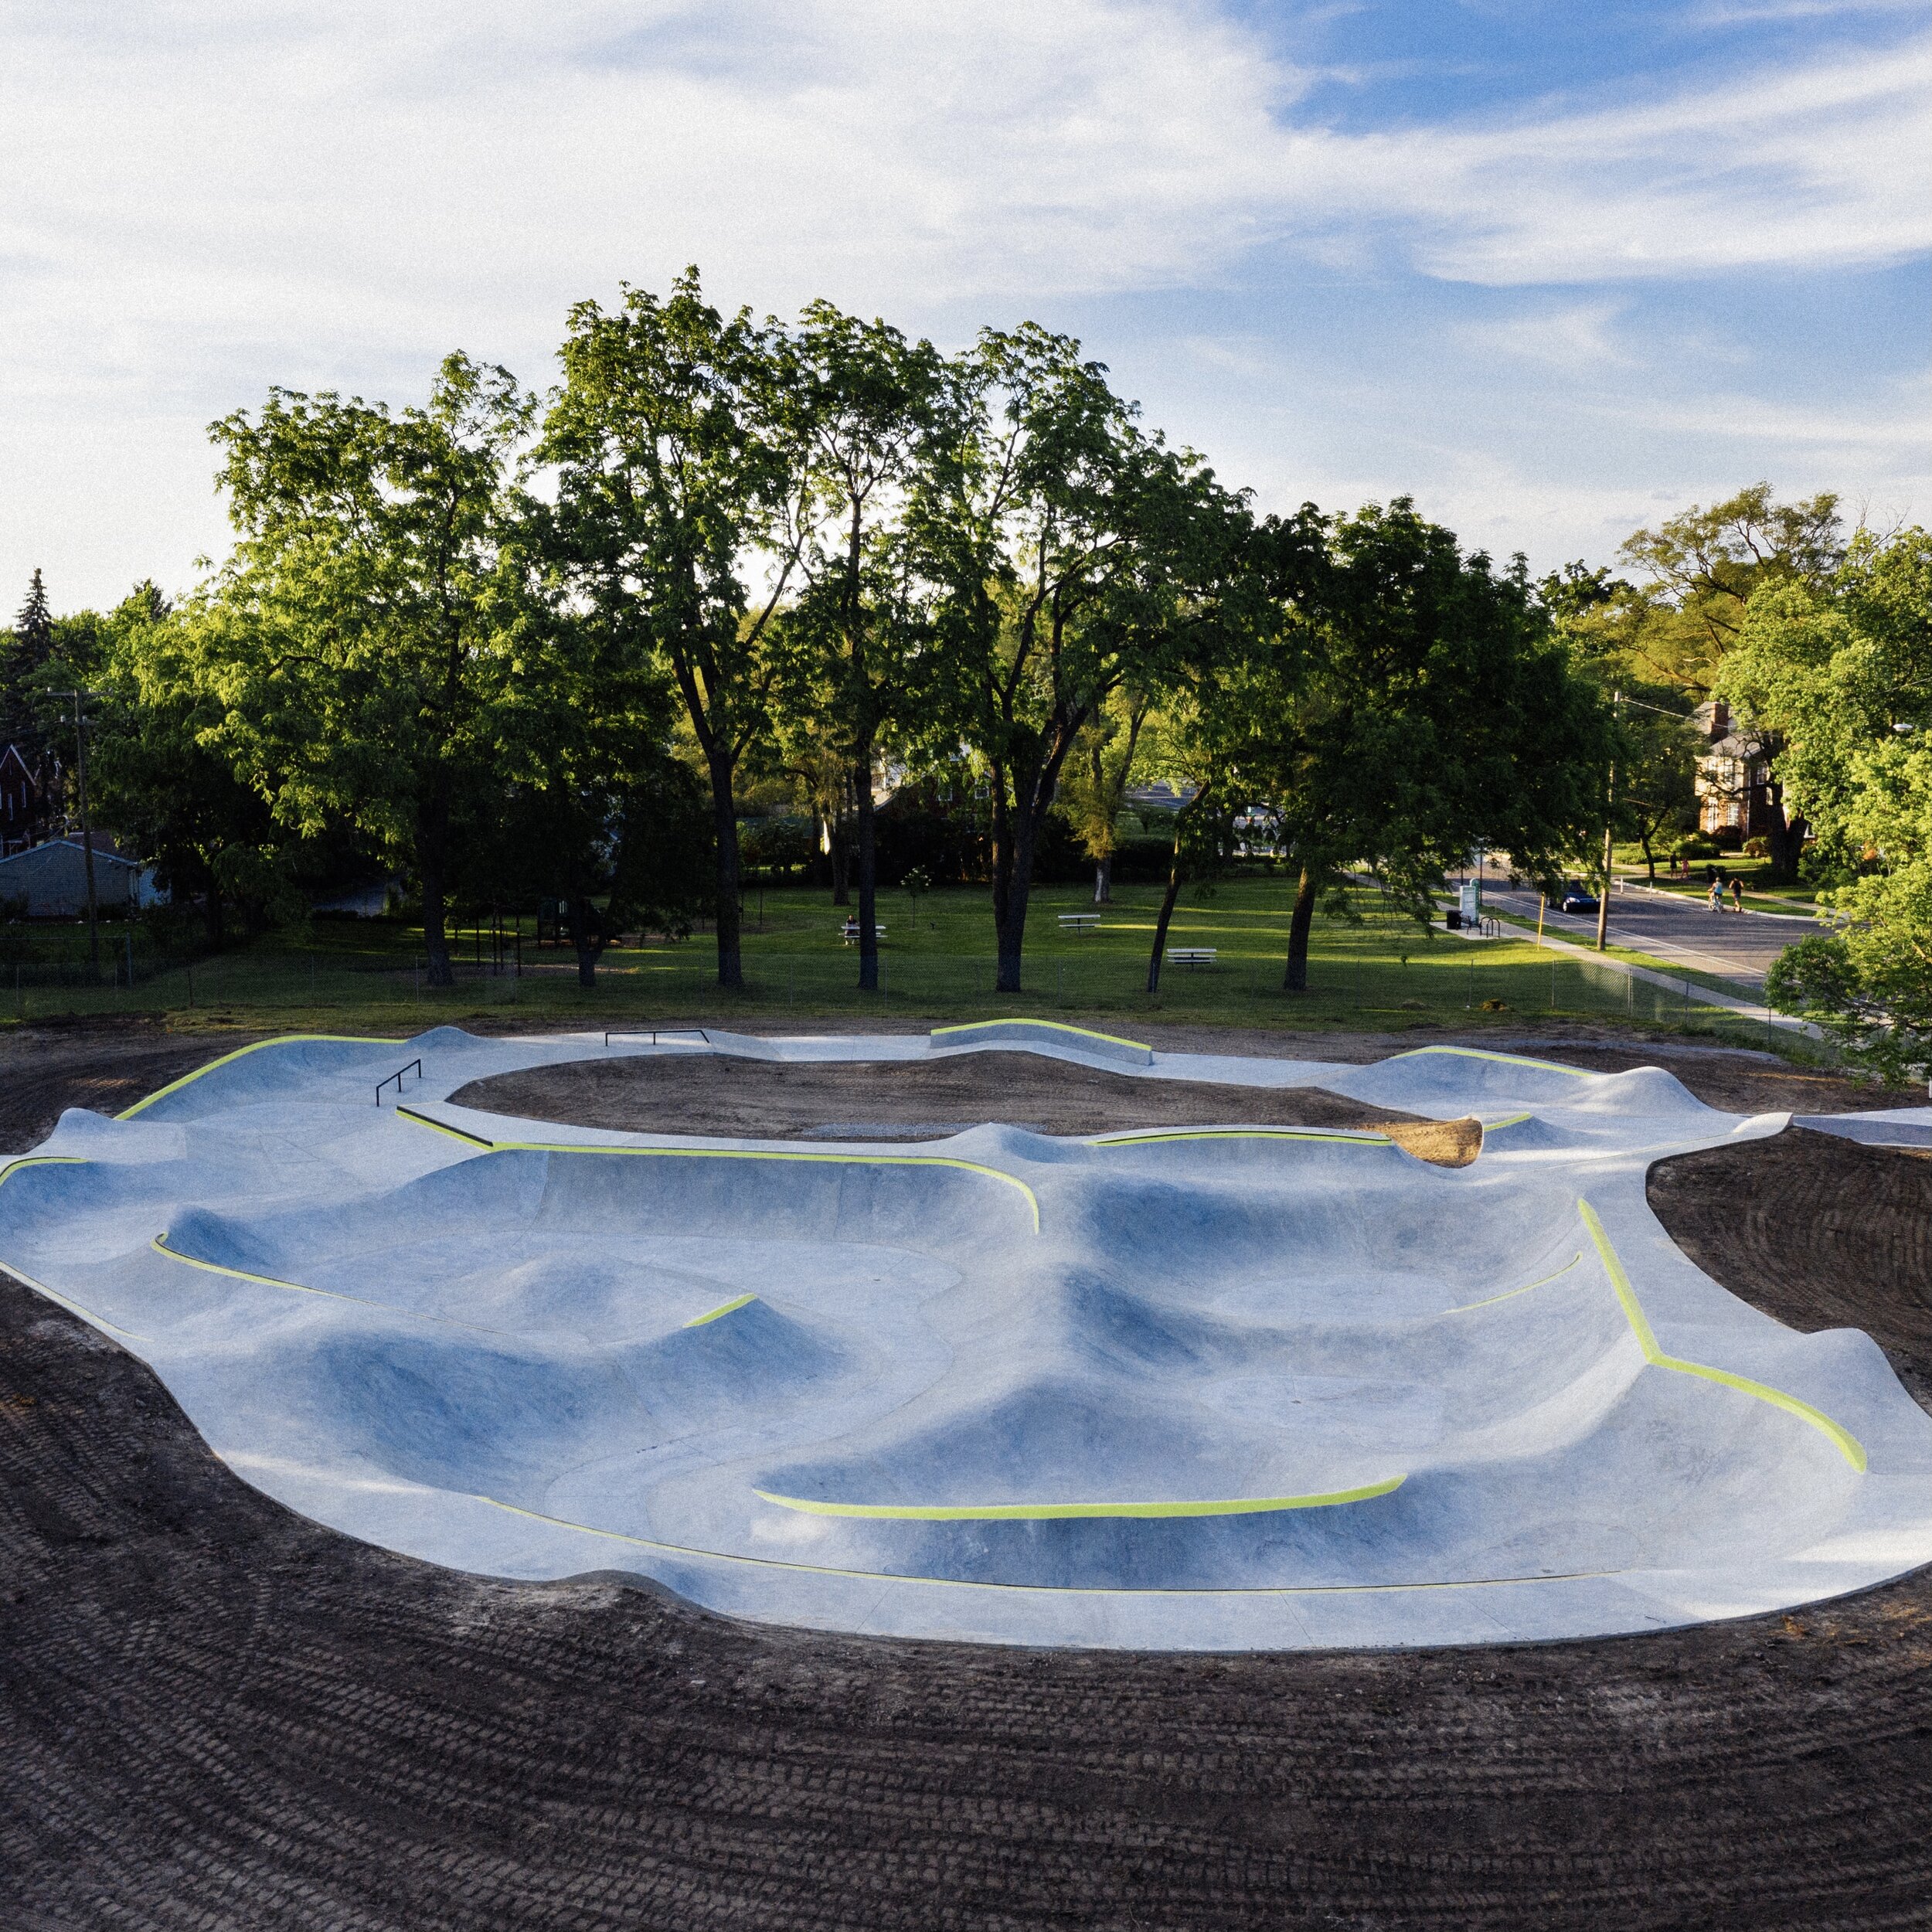 Fun and inviting in Ferndale, Michigan ✨ This skatepark won a 2021 design award from the Michigan Recreation and Parks Association (mParks) 🏆